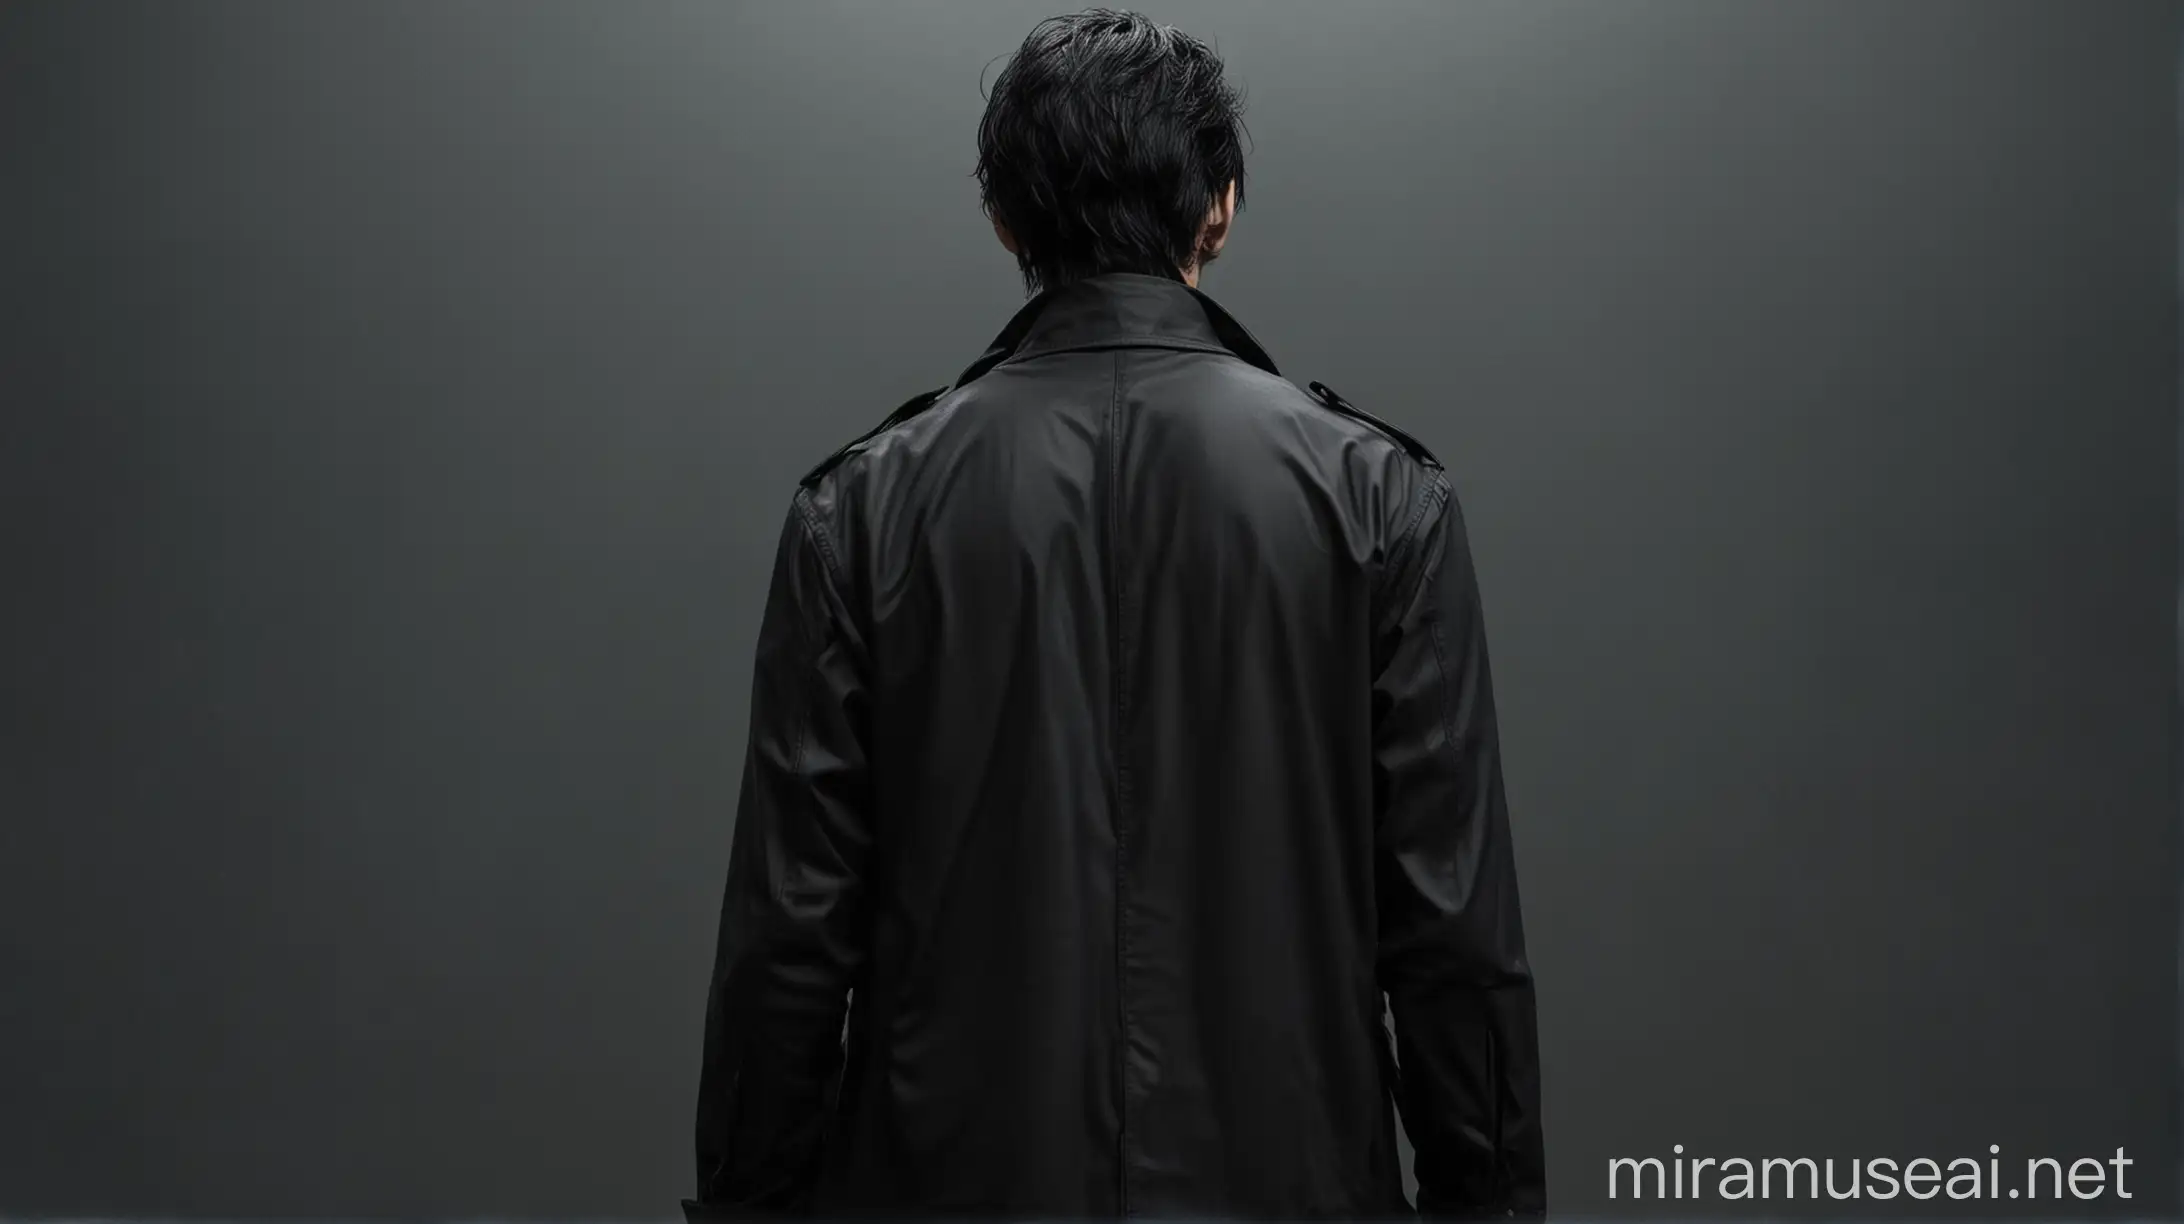 Mysterious Figure with Black Hair in Dark Attire Enigmatic Back View Portrait